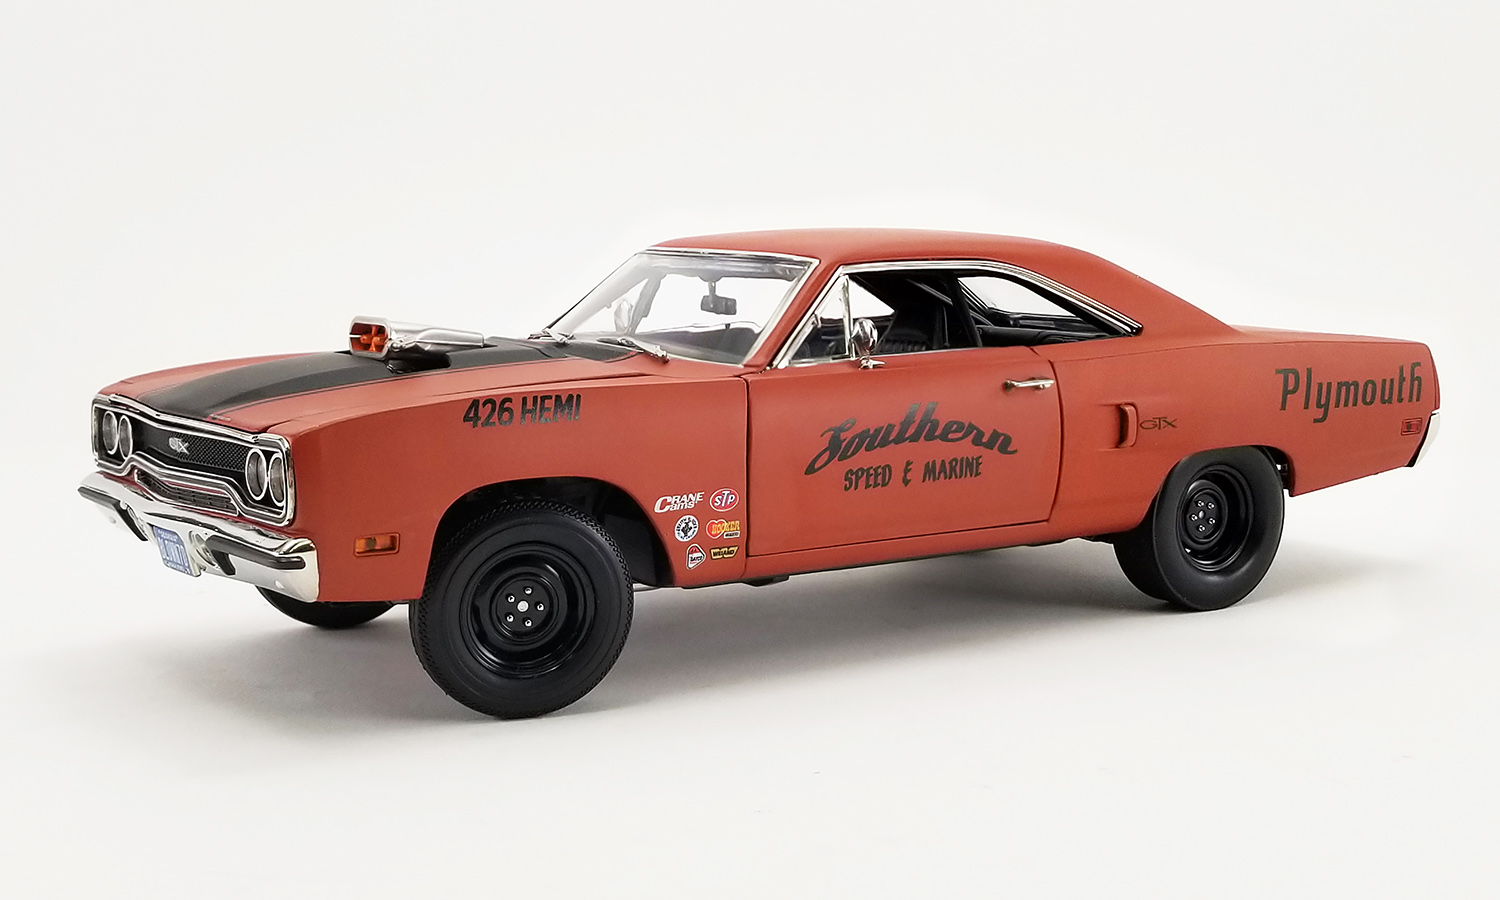 GMP FCA Plymouth Division ライセンス商品 GMP 1 18 ミニカー ダイキャストモデル 1970年モデル プリムス 1970 Plymouth GTX - Drag Car - Southern Speed  Marine